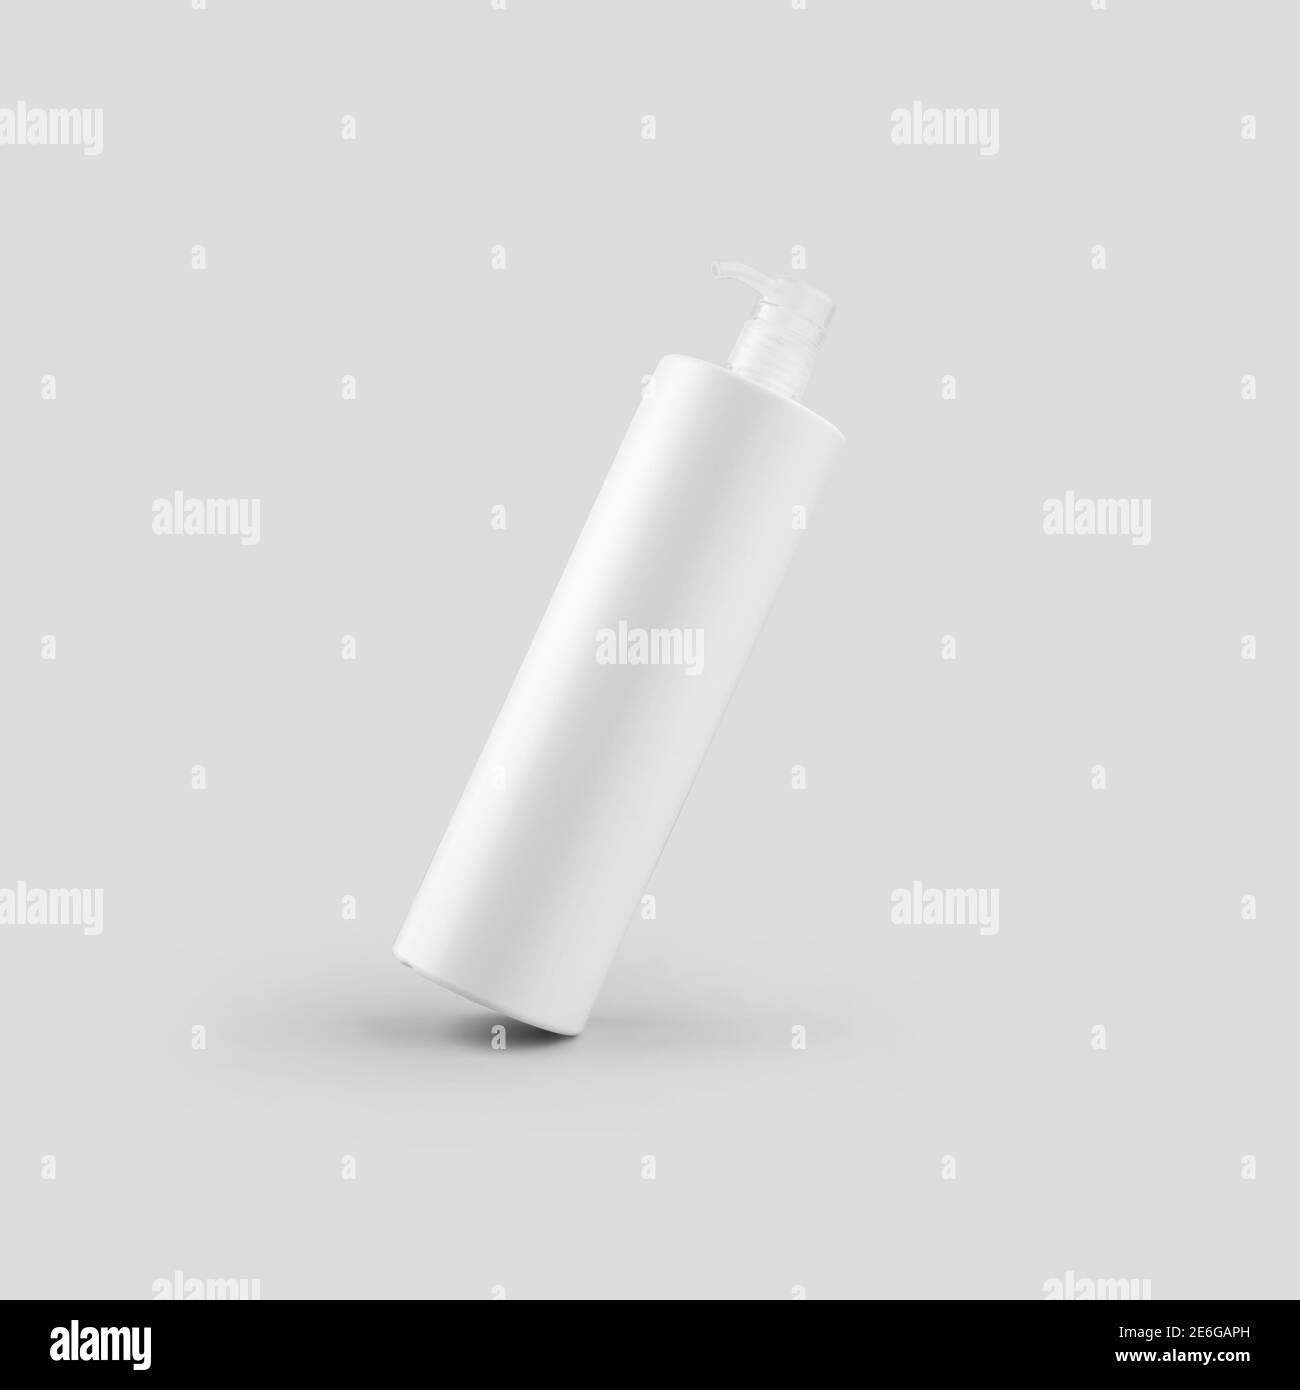 Download Template Of A White Plastic Bottle With A Dispenser Container For Cream Gel Soap For Design Presentation Mockup Of Matte Jar With Pump Isolated Stock Photo Alamy